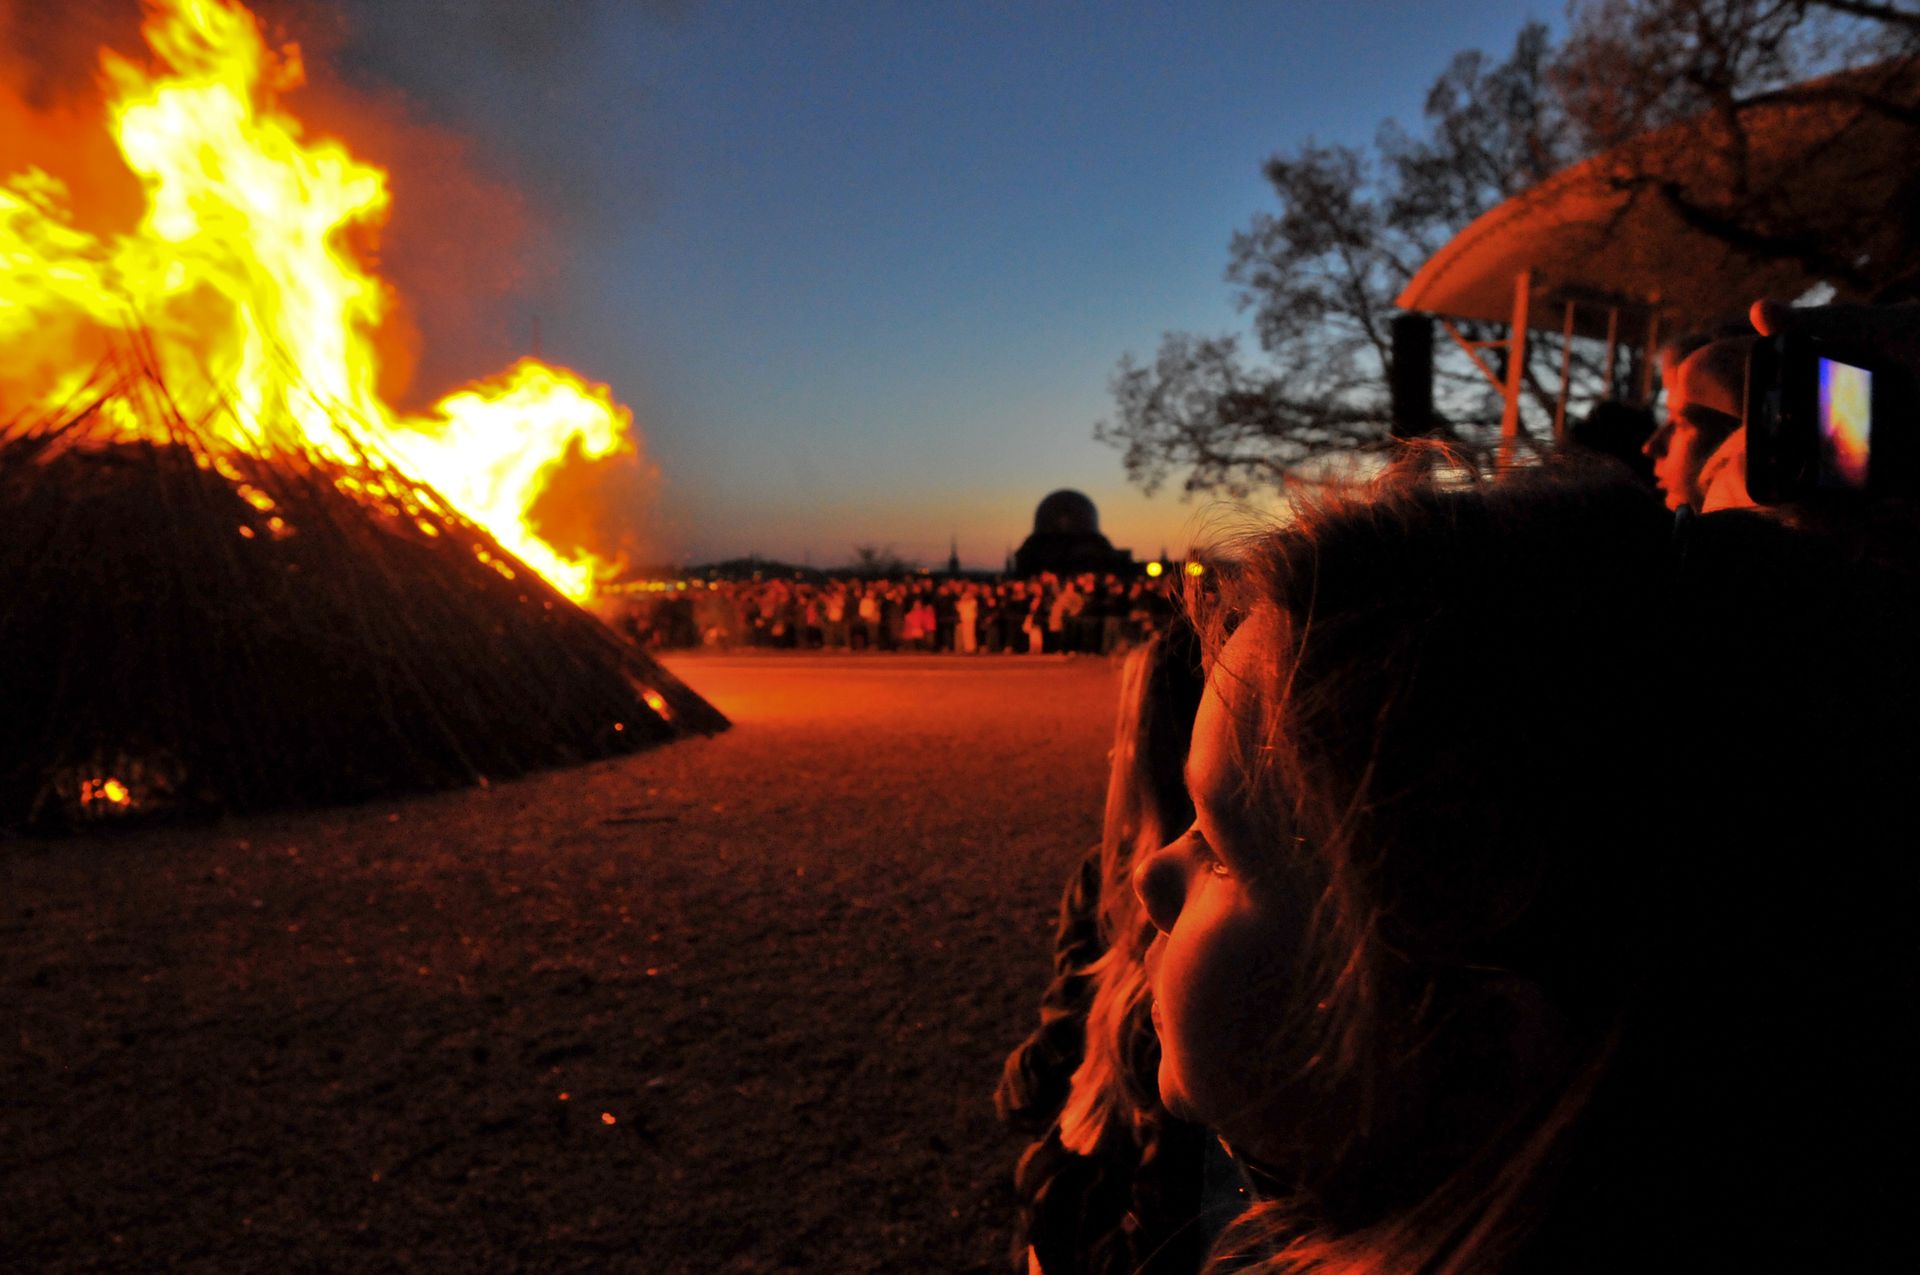 Crowds of people stand in the dark looking at a bonfire.